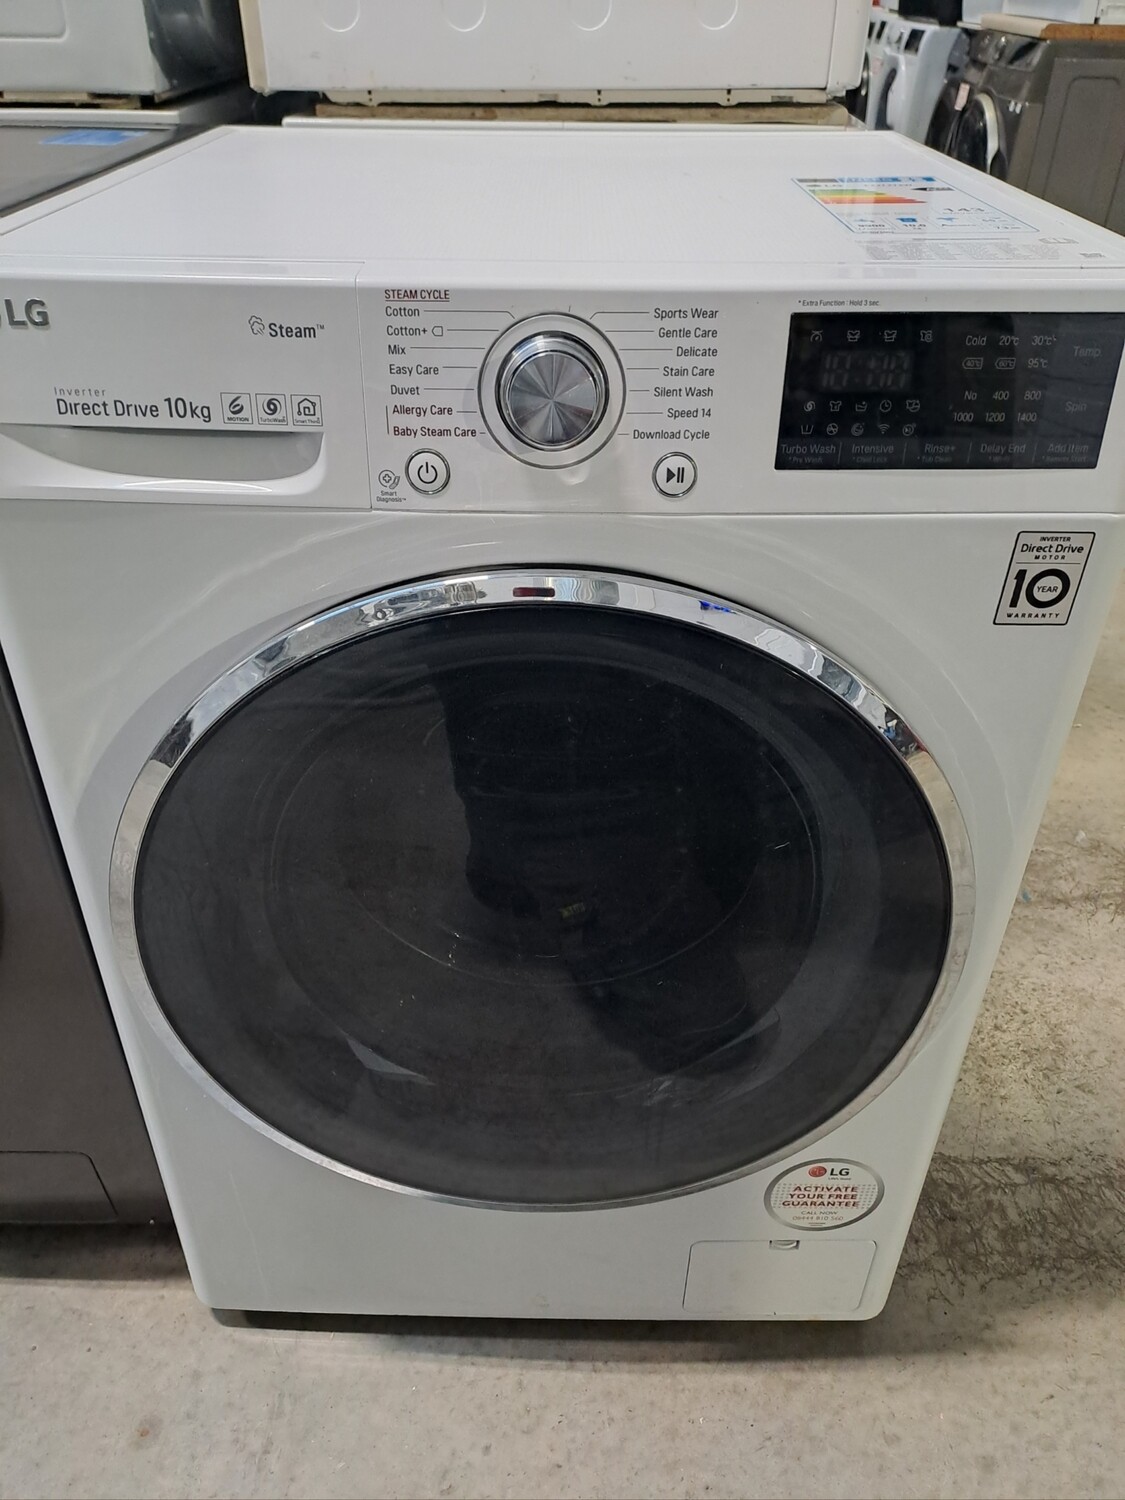 LG F4J7JY2W 10kg Load, 1400 Spin A+++ Washing Machine - White - Refurbished - 6 Month Guarantee. This item is located in our Whitby Road Shop